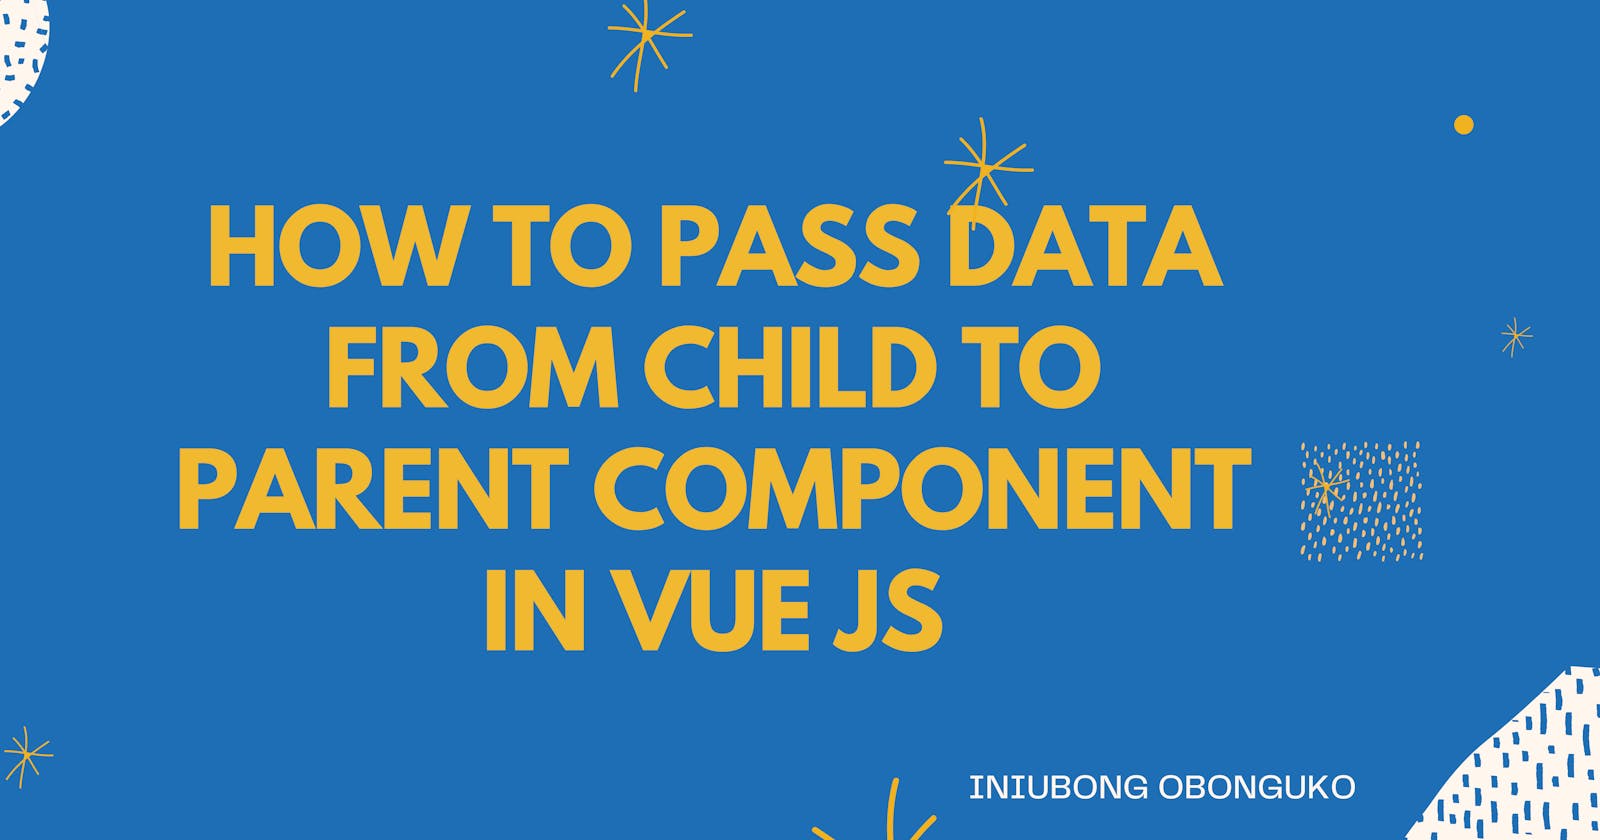 How to Pass Data from Child to Parent Component in Vue js